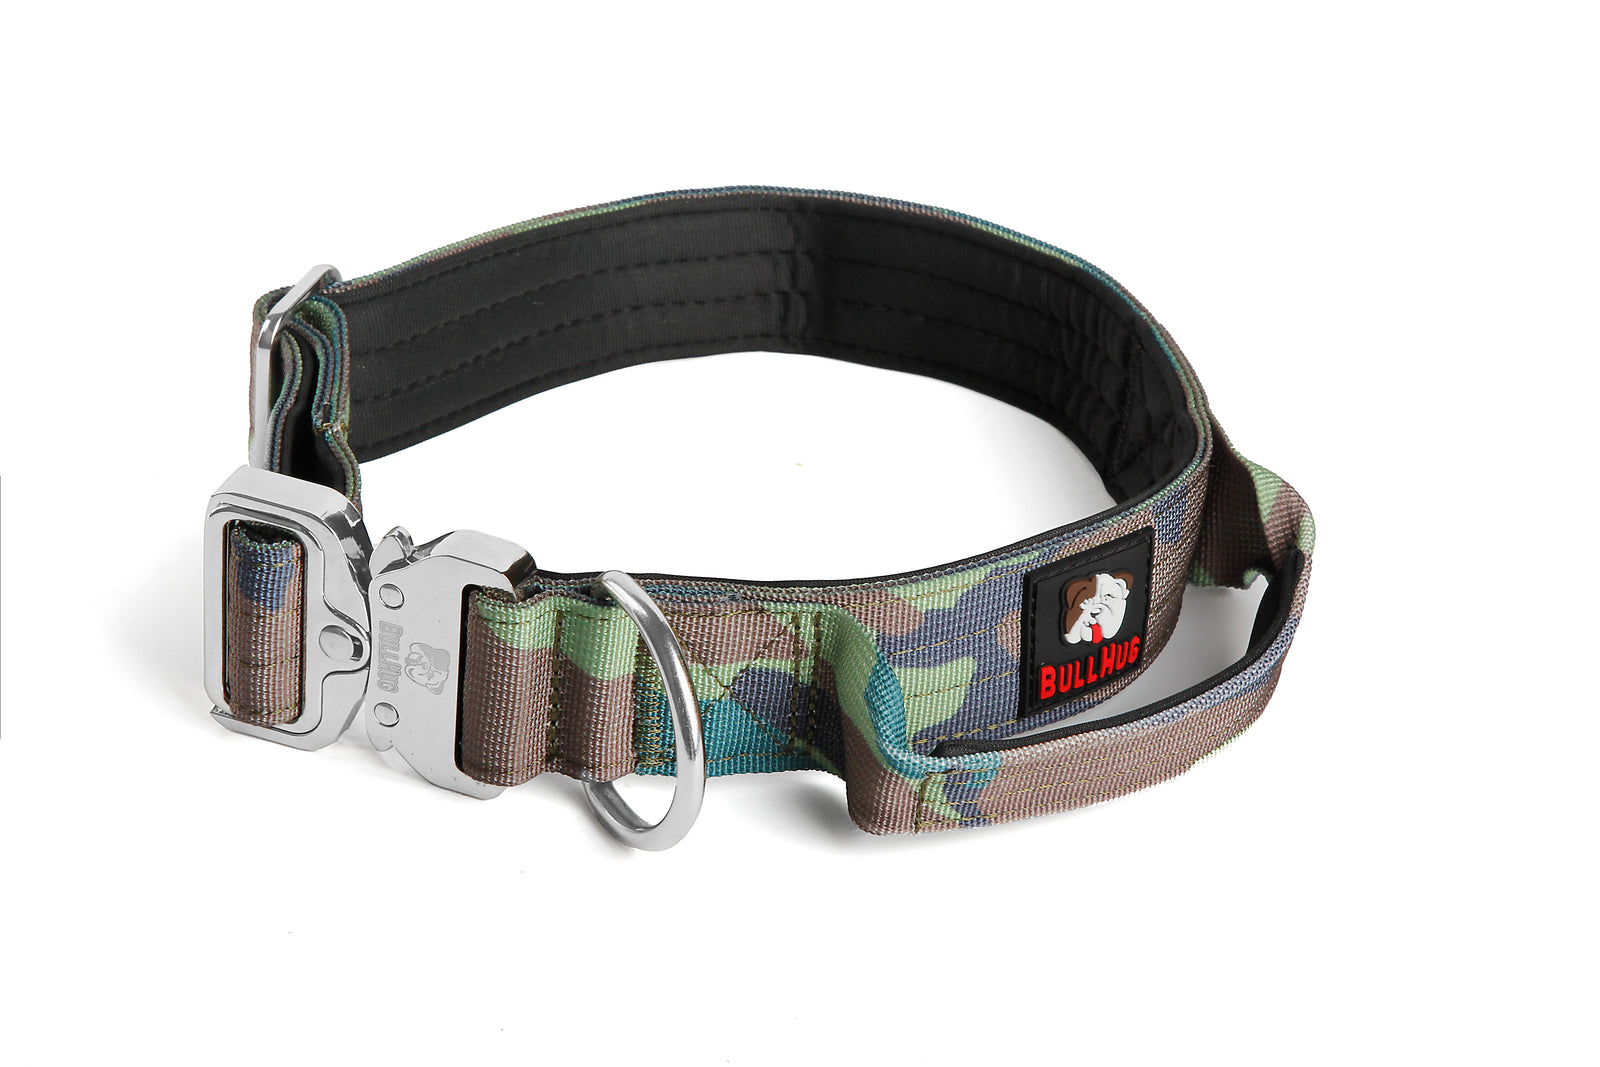 The Tactical Collar: A Heavy Duty Solution with a Metal Buckle and Padded Comfort